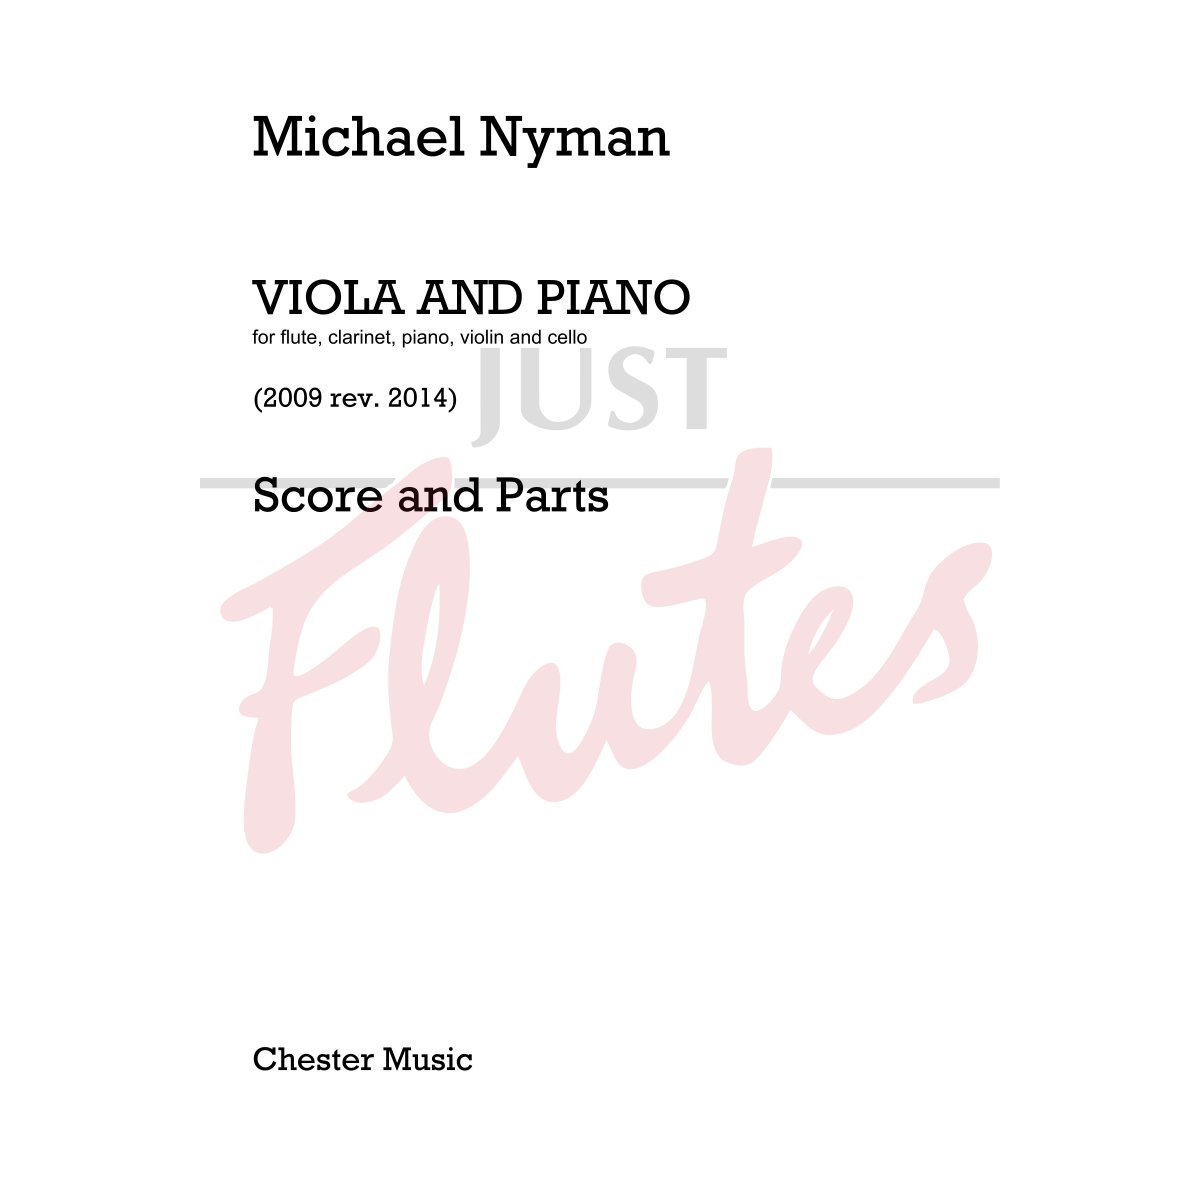 Viola and Piano (Revised 2014)